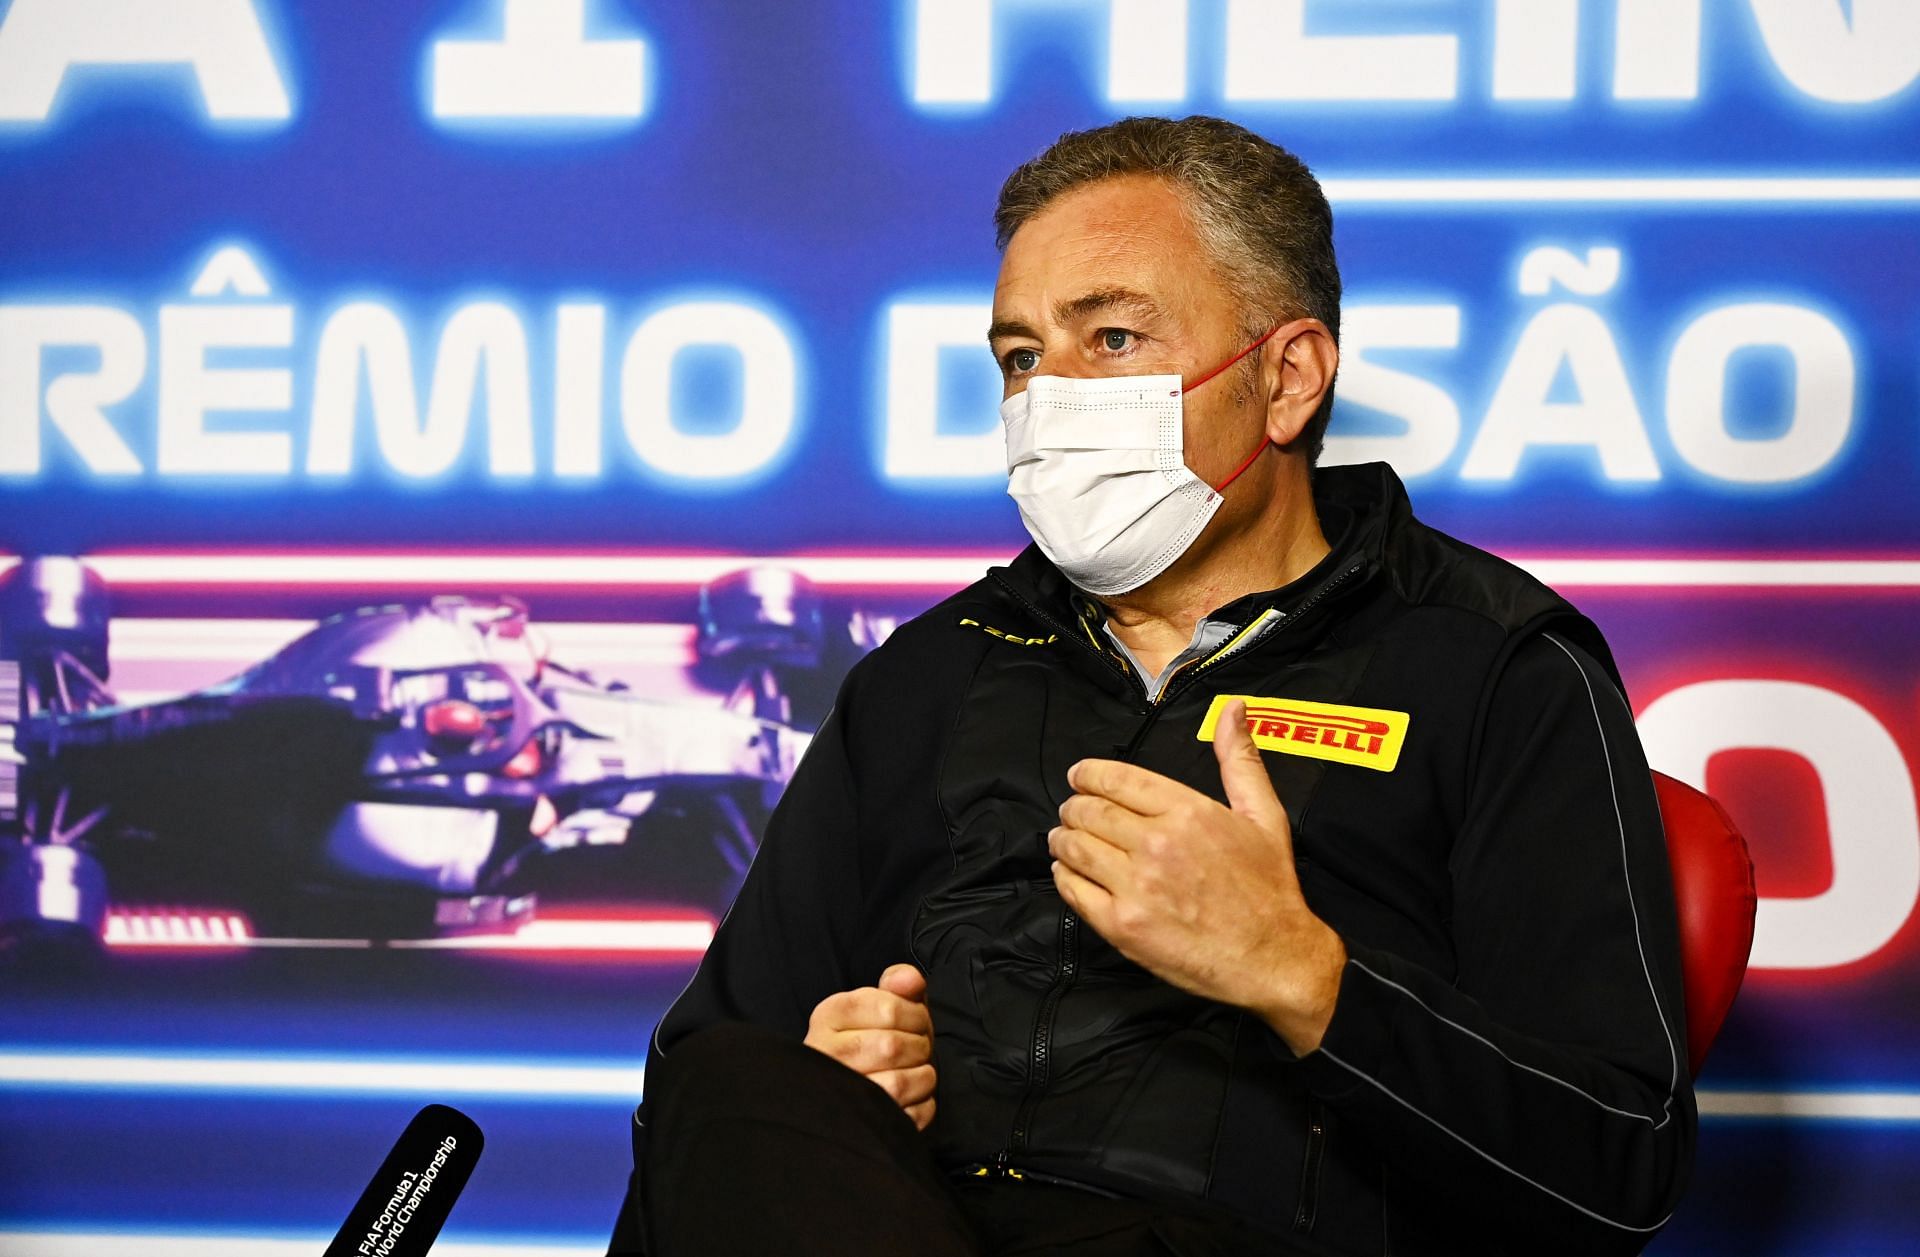 Pirelli boss Mario Isola in conversation with the press during the 2021 Sao Paulo Grand Prix in Brazil (Photo by Clive Mason/Getty Images)